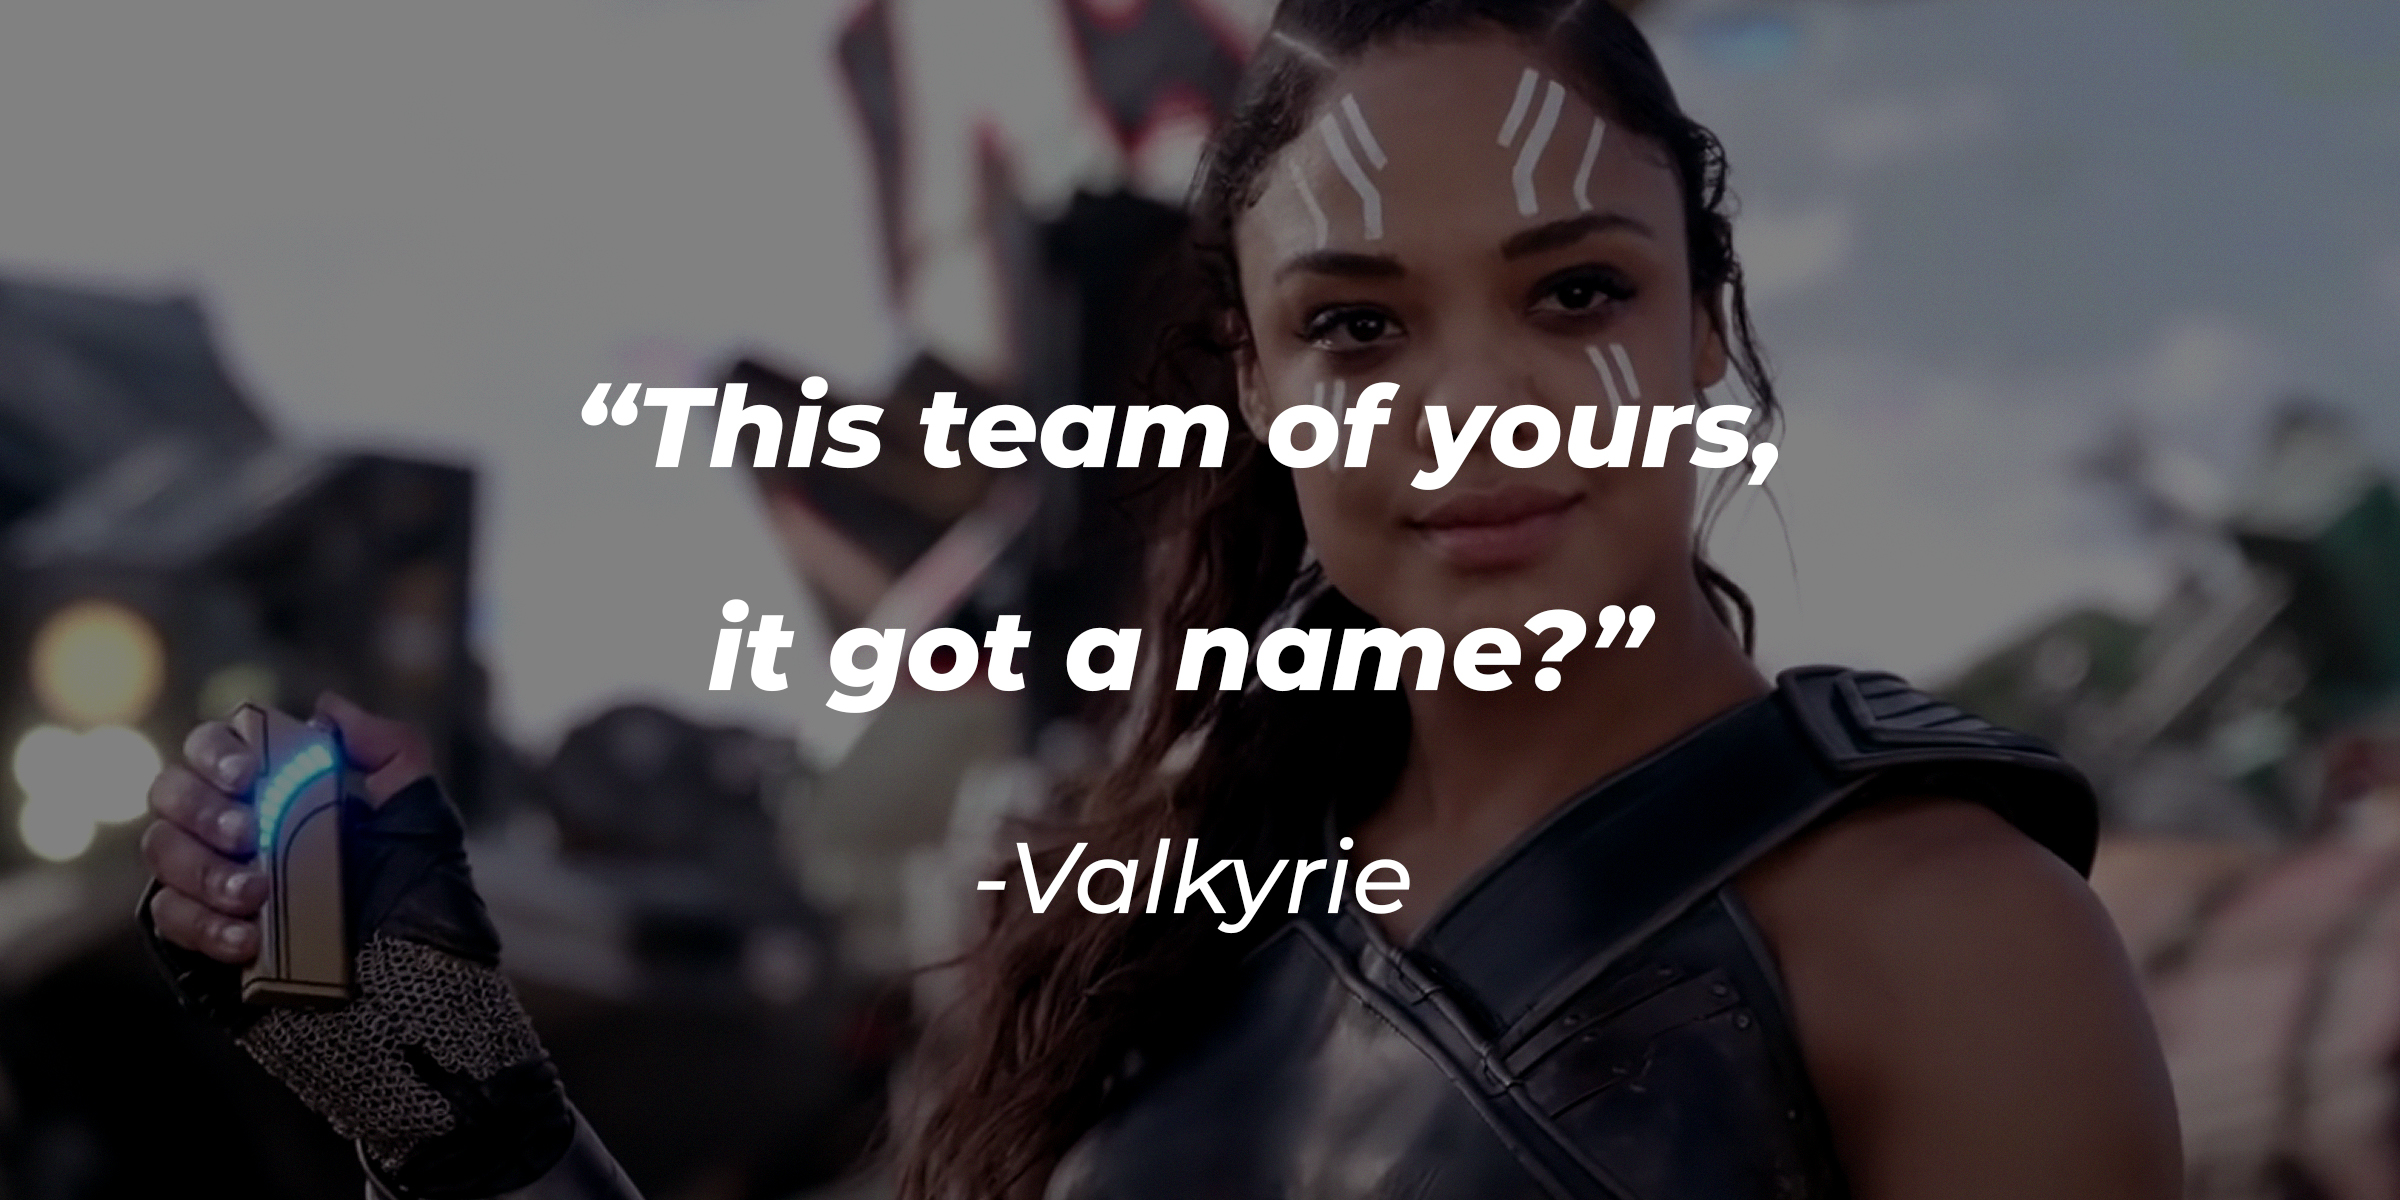 A photo of Valkyrie with Valkyrie's quote: "This team of yours, it got a name?” | Source: youtube.com/Netflix